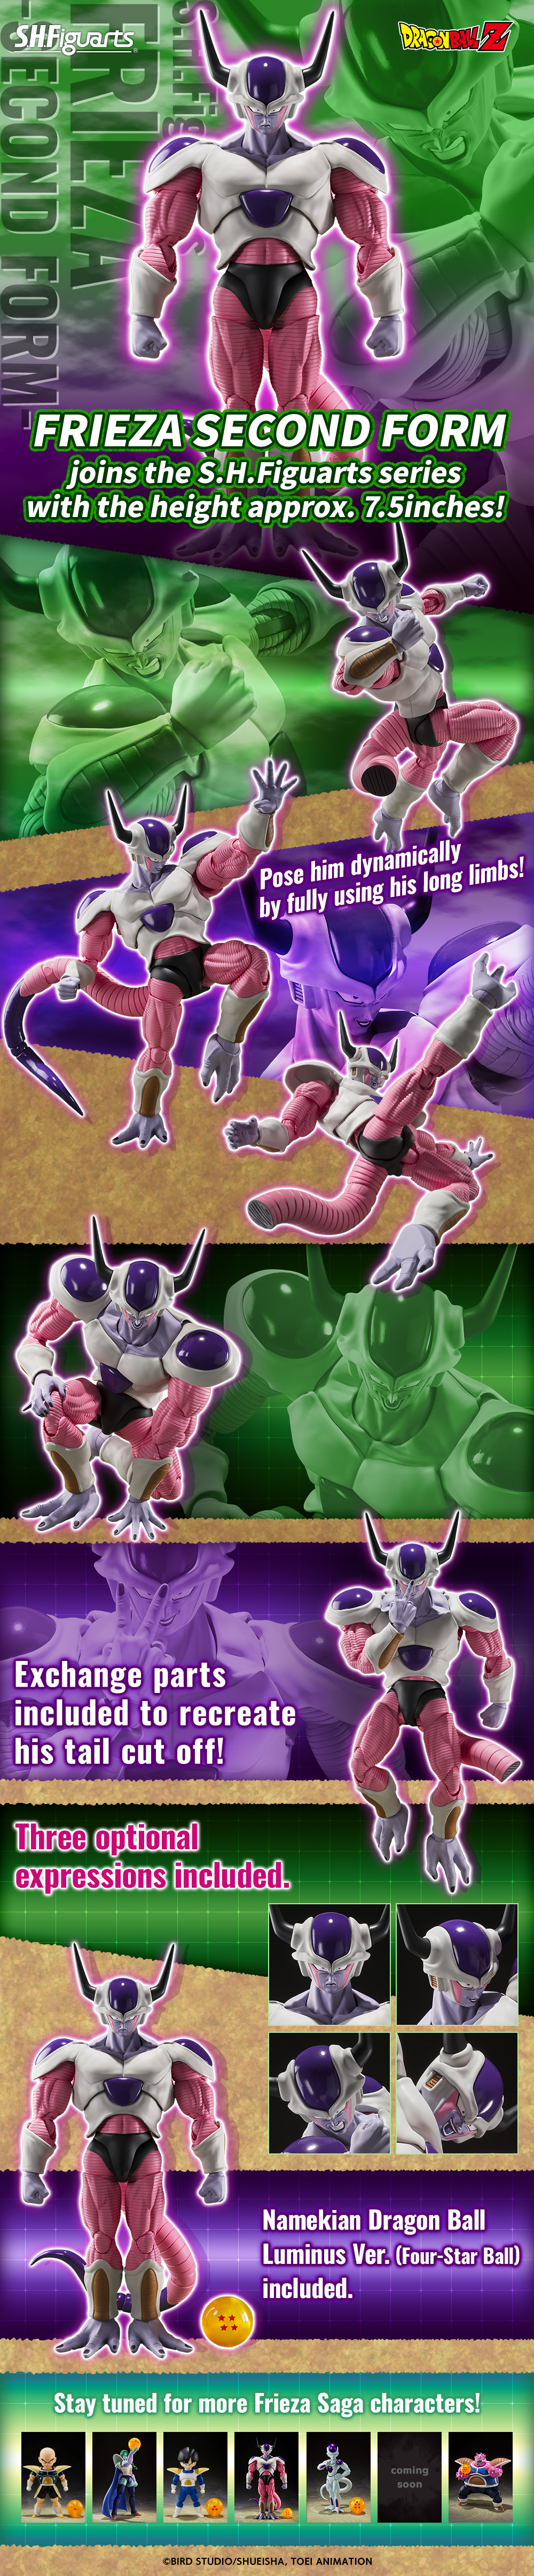 Second Form Frieza from "Dragon Ball Z" is now available from S.H...